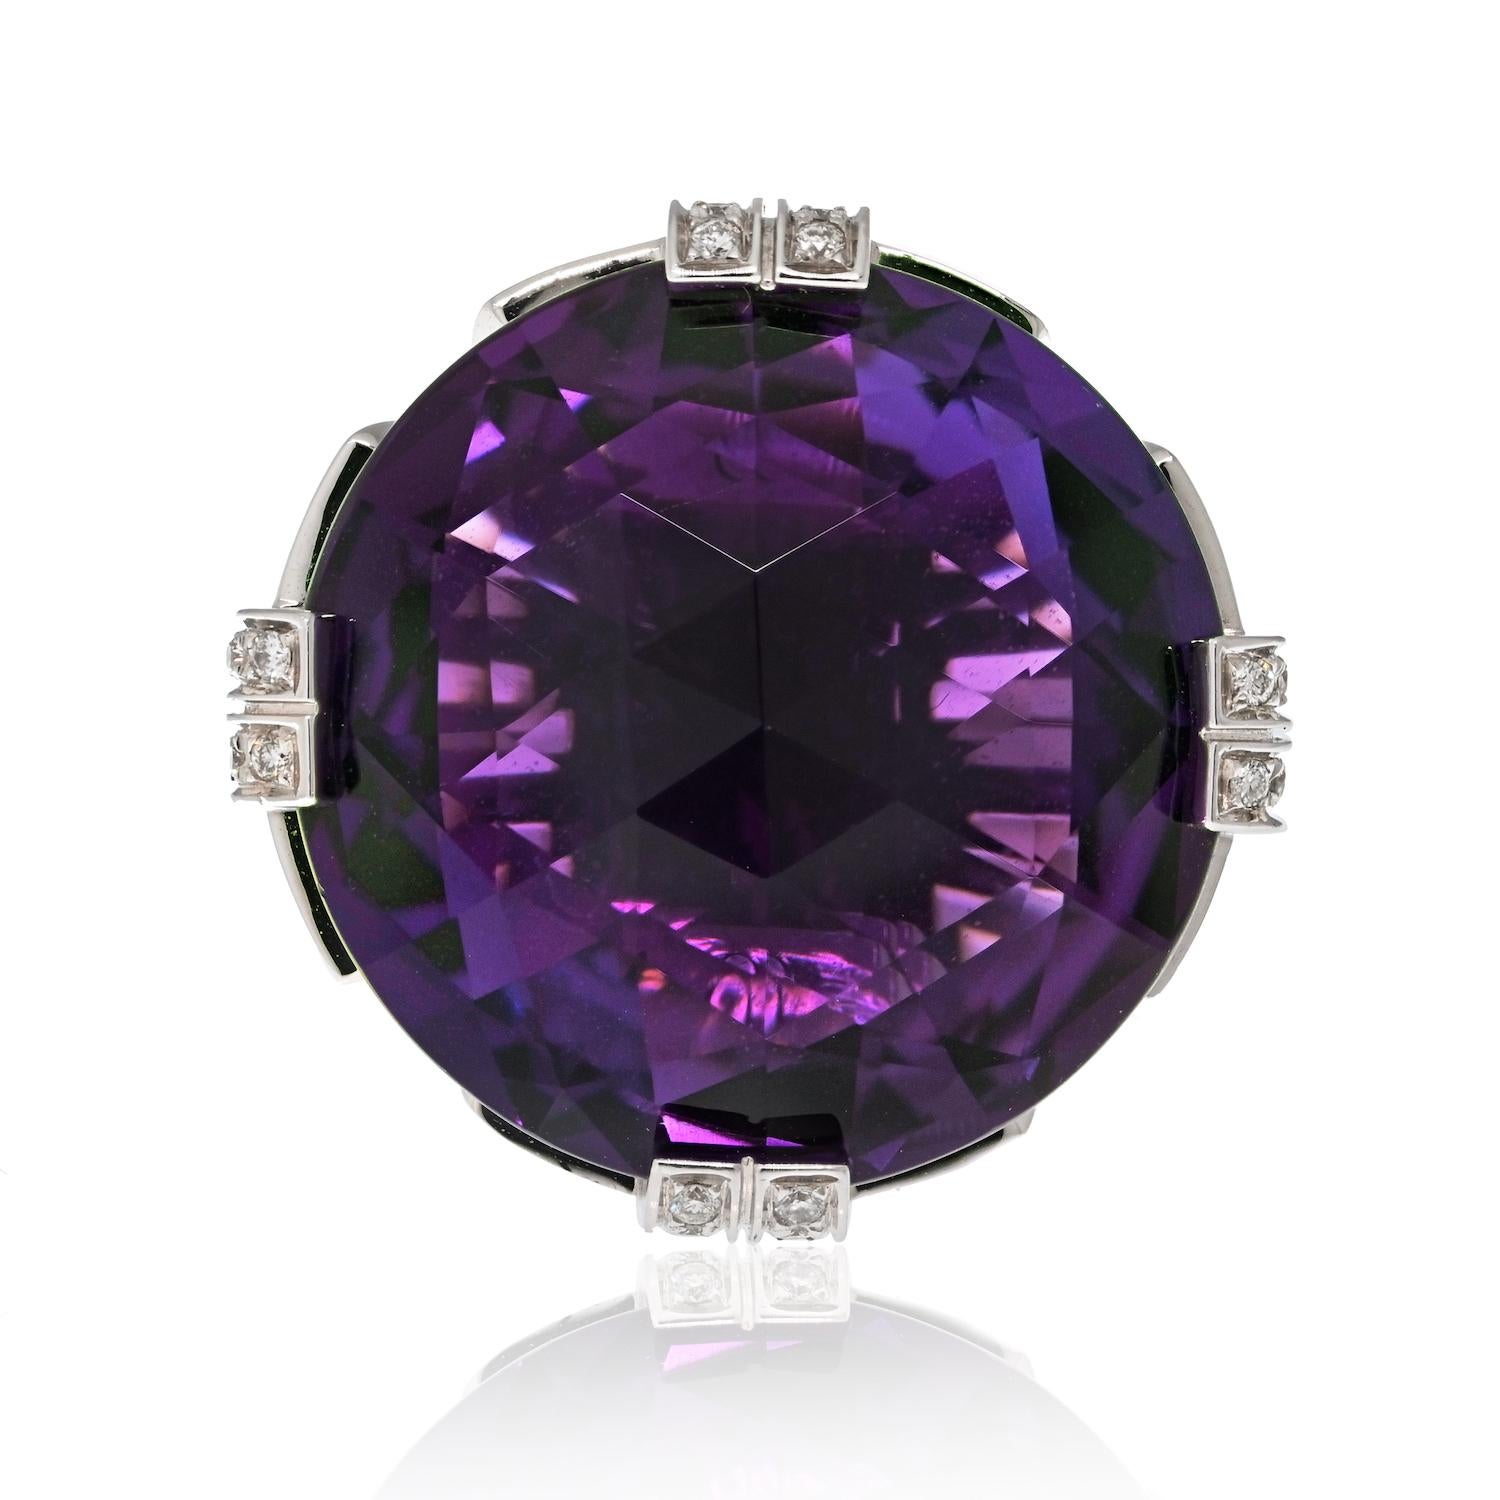 Prepare to be captivated by the timeless elegance of this estate Bvlgari ring. Crafted in 18 karat white gold, this exquisite piece showcases a round faceted amethyst as its centerpiece, surrounded by a dazzling display of round brilliant cut